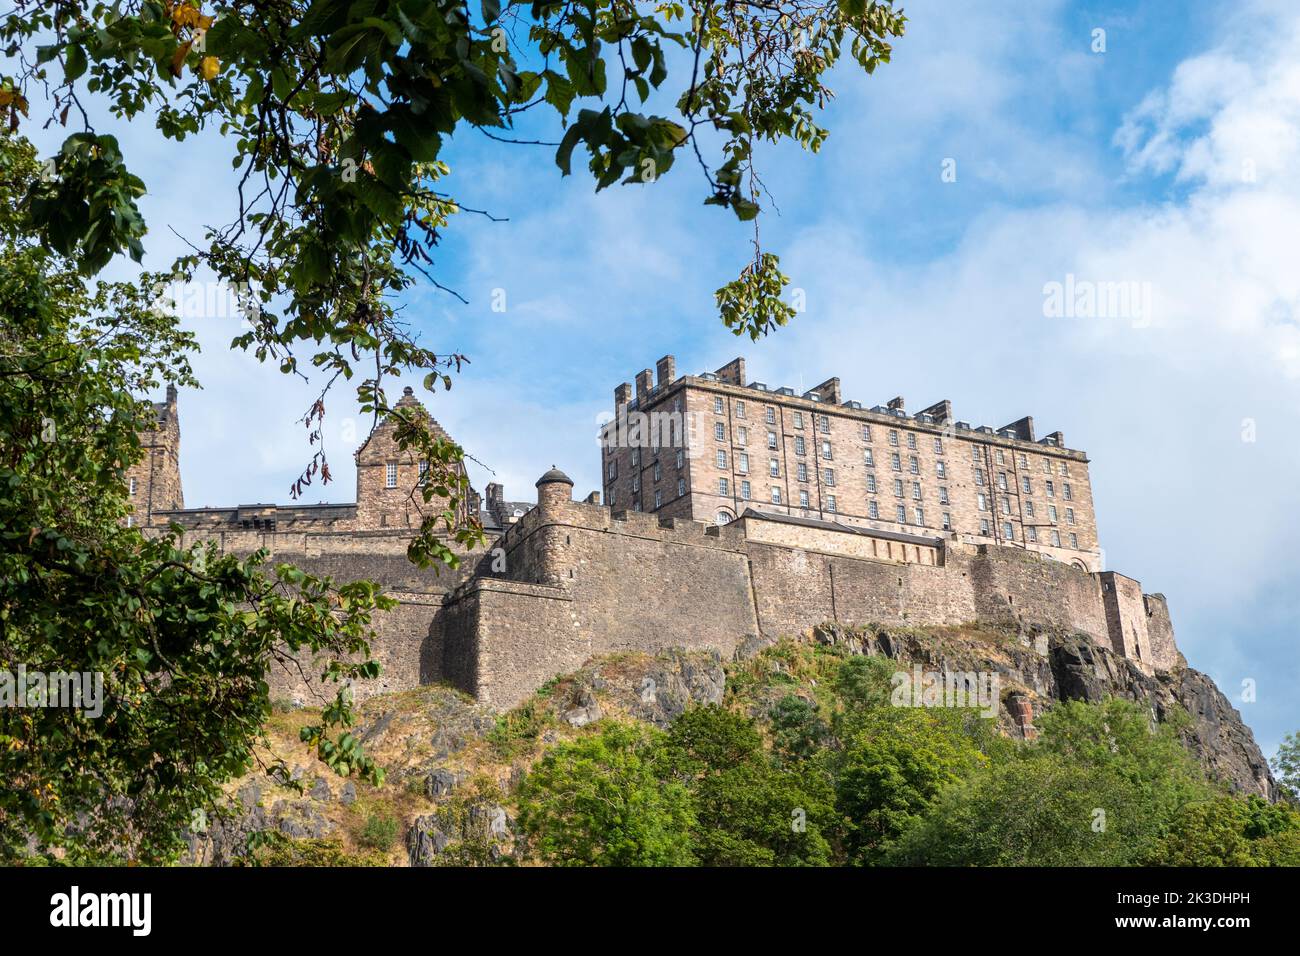 view at royal palace and castle in Edinburgh, Scotland Stock Photo